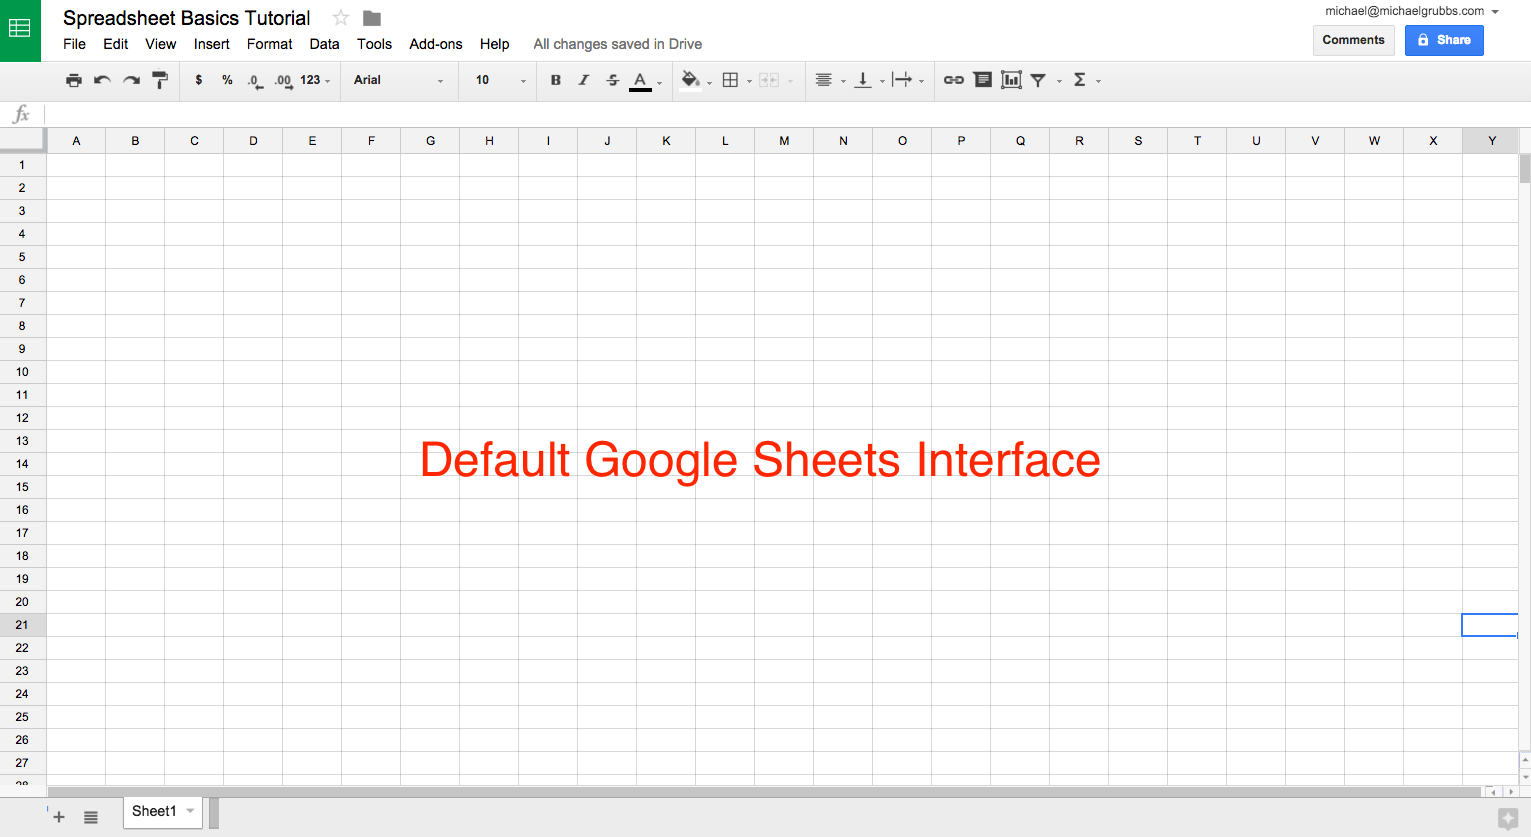 Google Docs Spreadsheet Tutorial Intended For Google Sheets 101: The Beginner's Guide To Online Spreadsheets  The